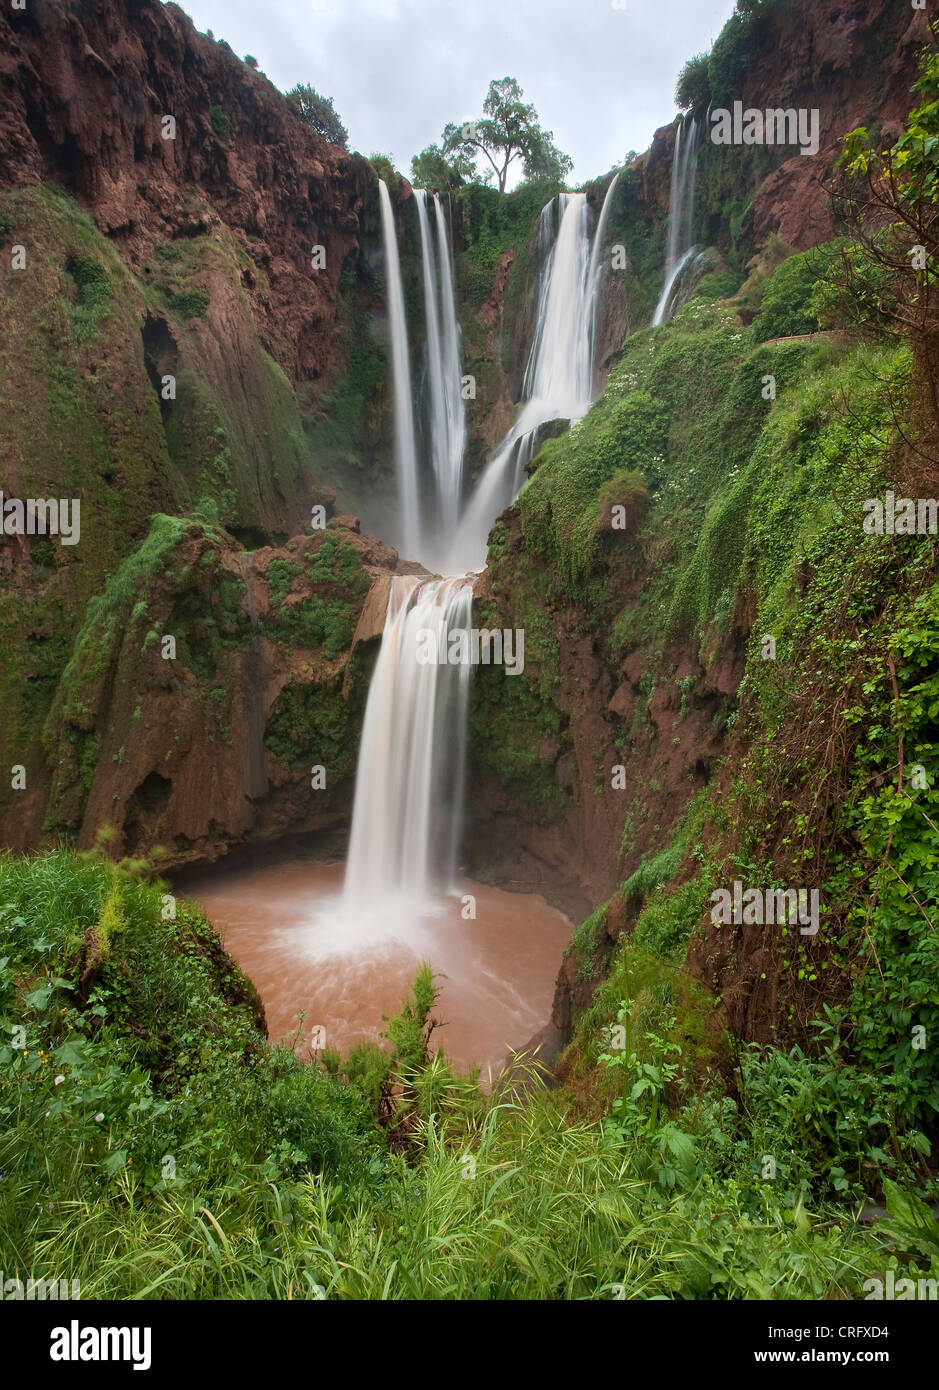 Cascades d'Ouzoud waterfall, El Abid river, Middle Atlas mountains, Morocco, Northern Africa. Stock Photo